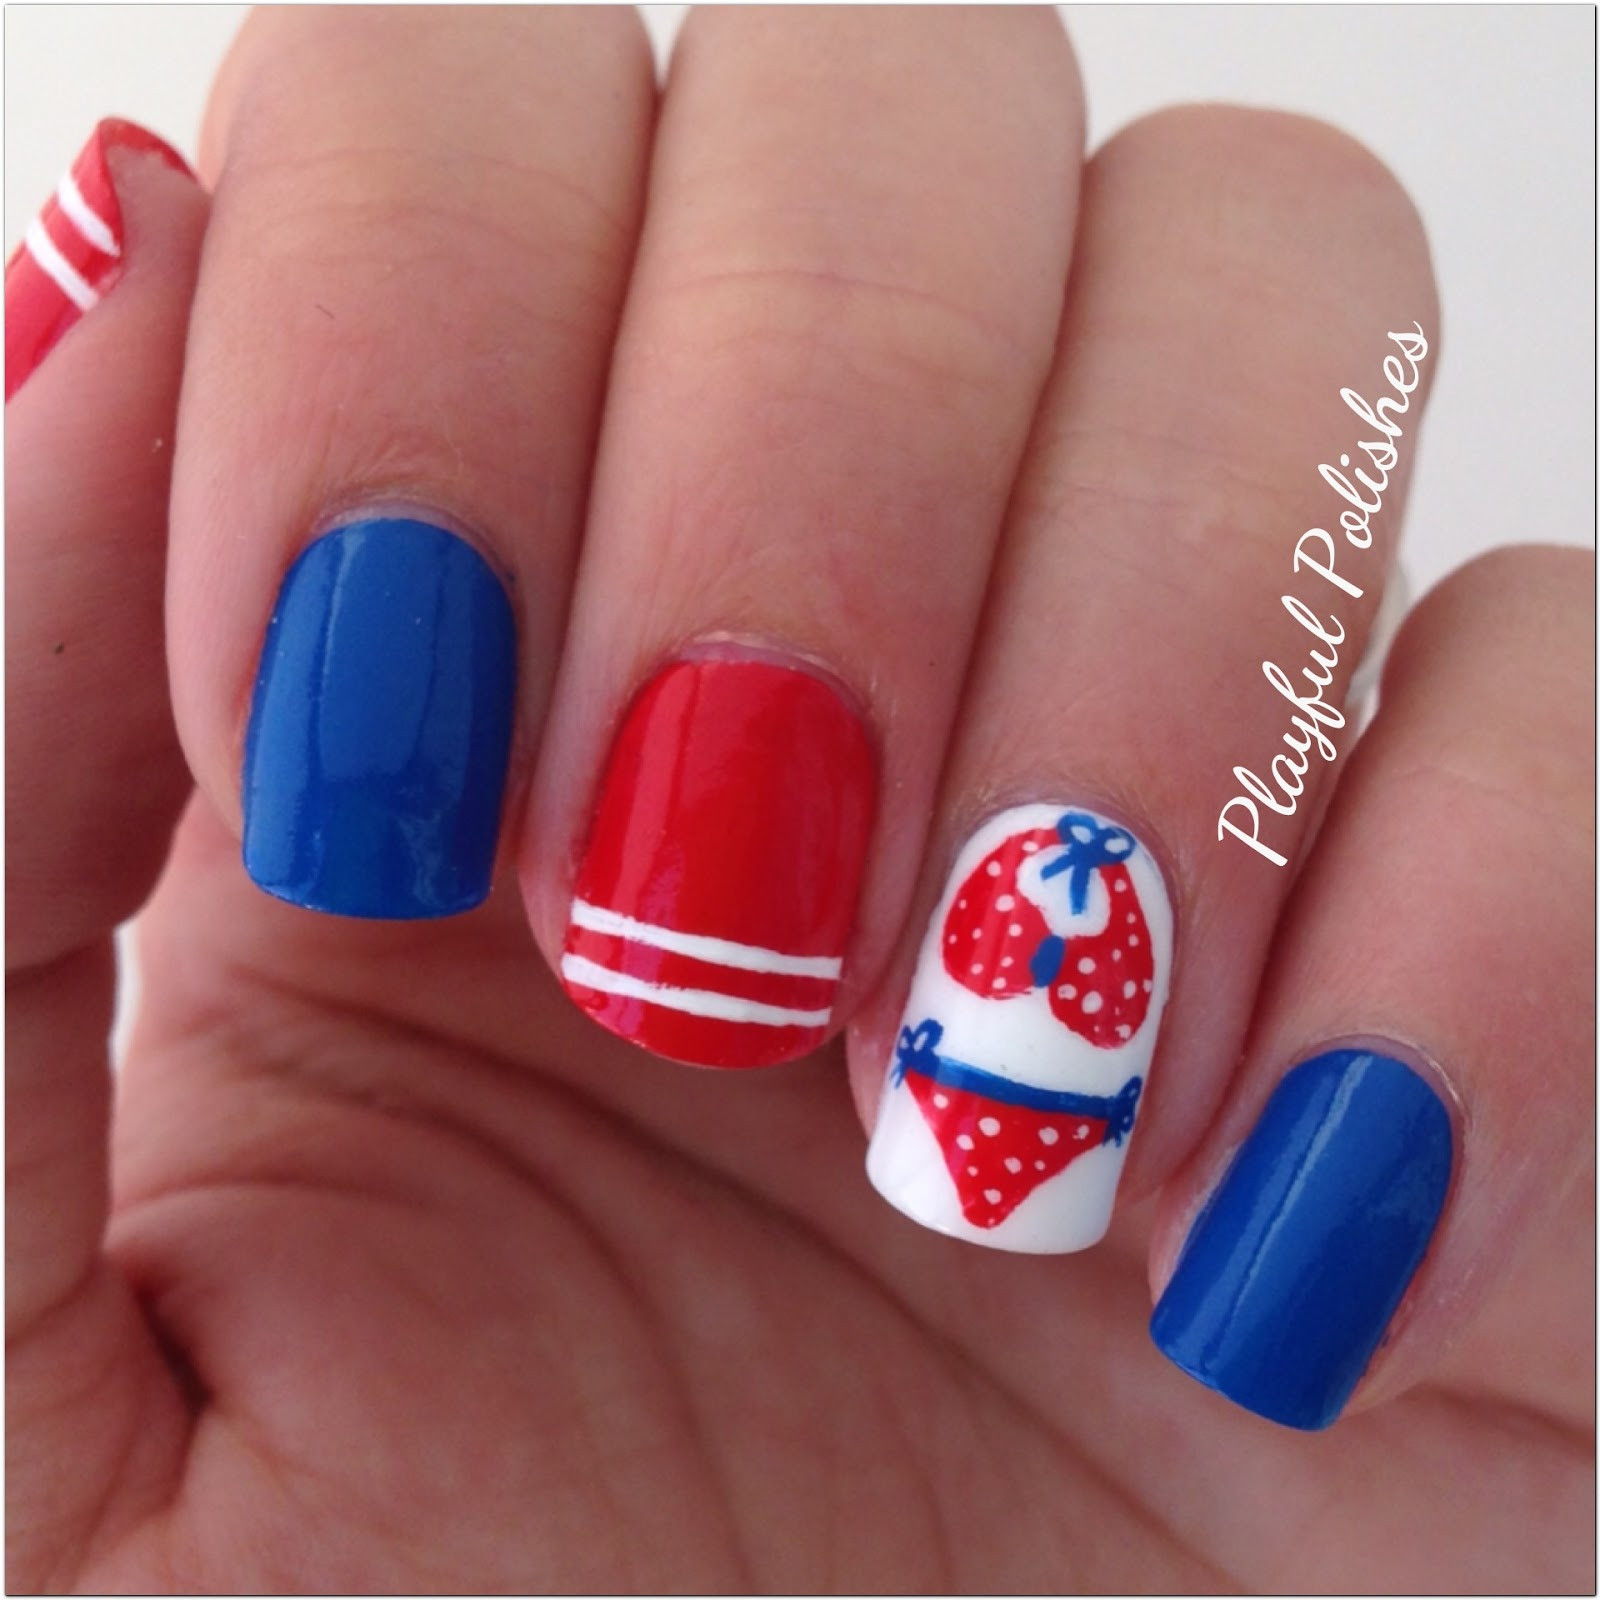 Nail Designs For 4th Of July
 Playful Polishes 4TH OF JULY NAIL ART